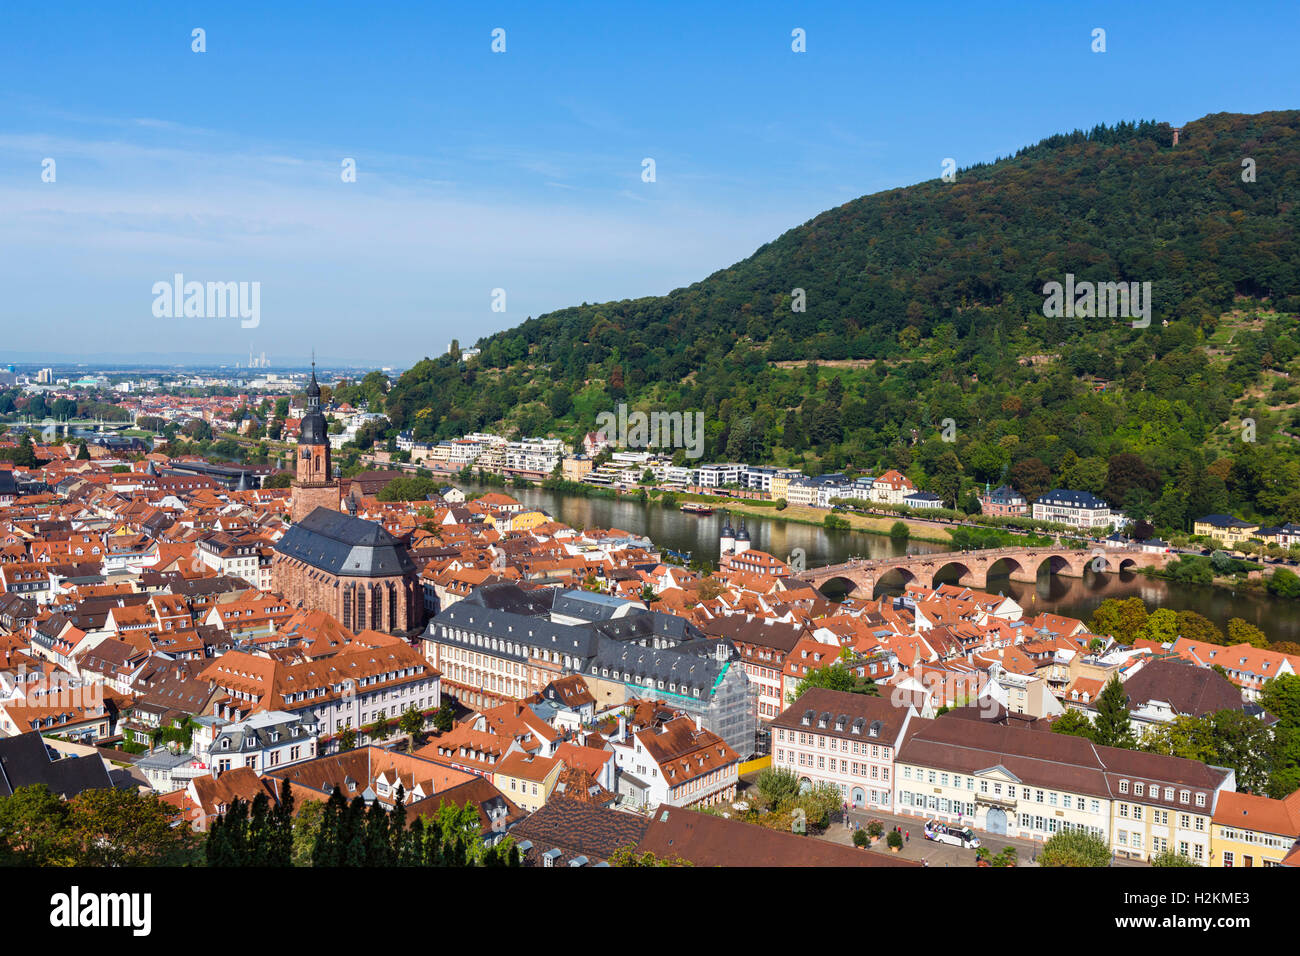 View over the old town from the Schloss, Heidelberg, Baden-Württemberg, Germany Stock Photo